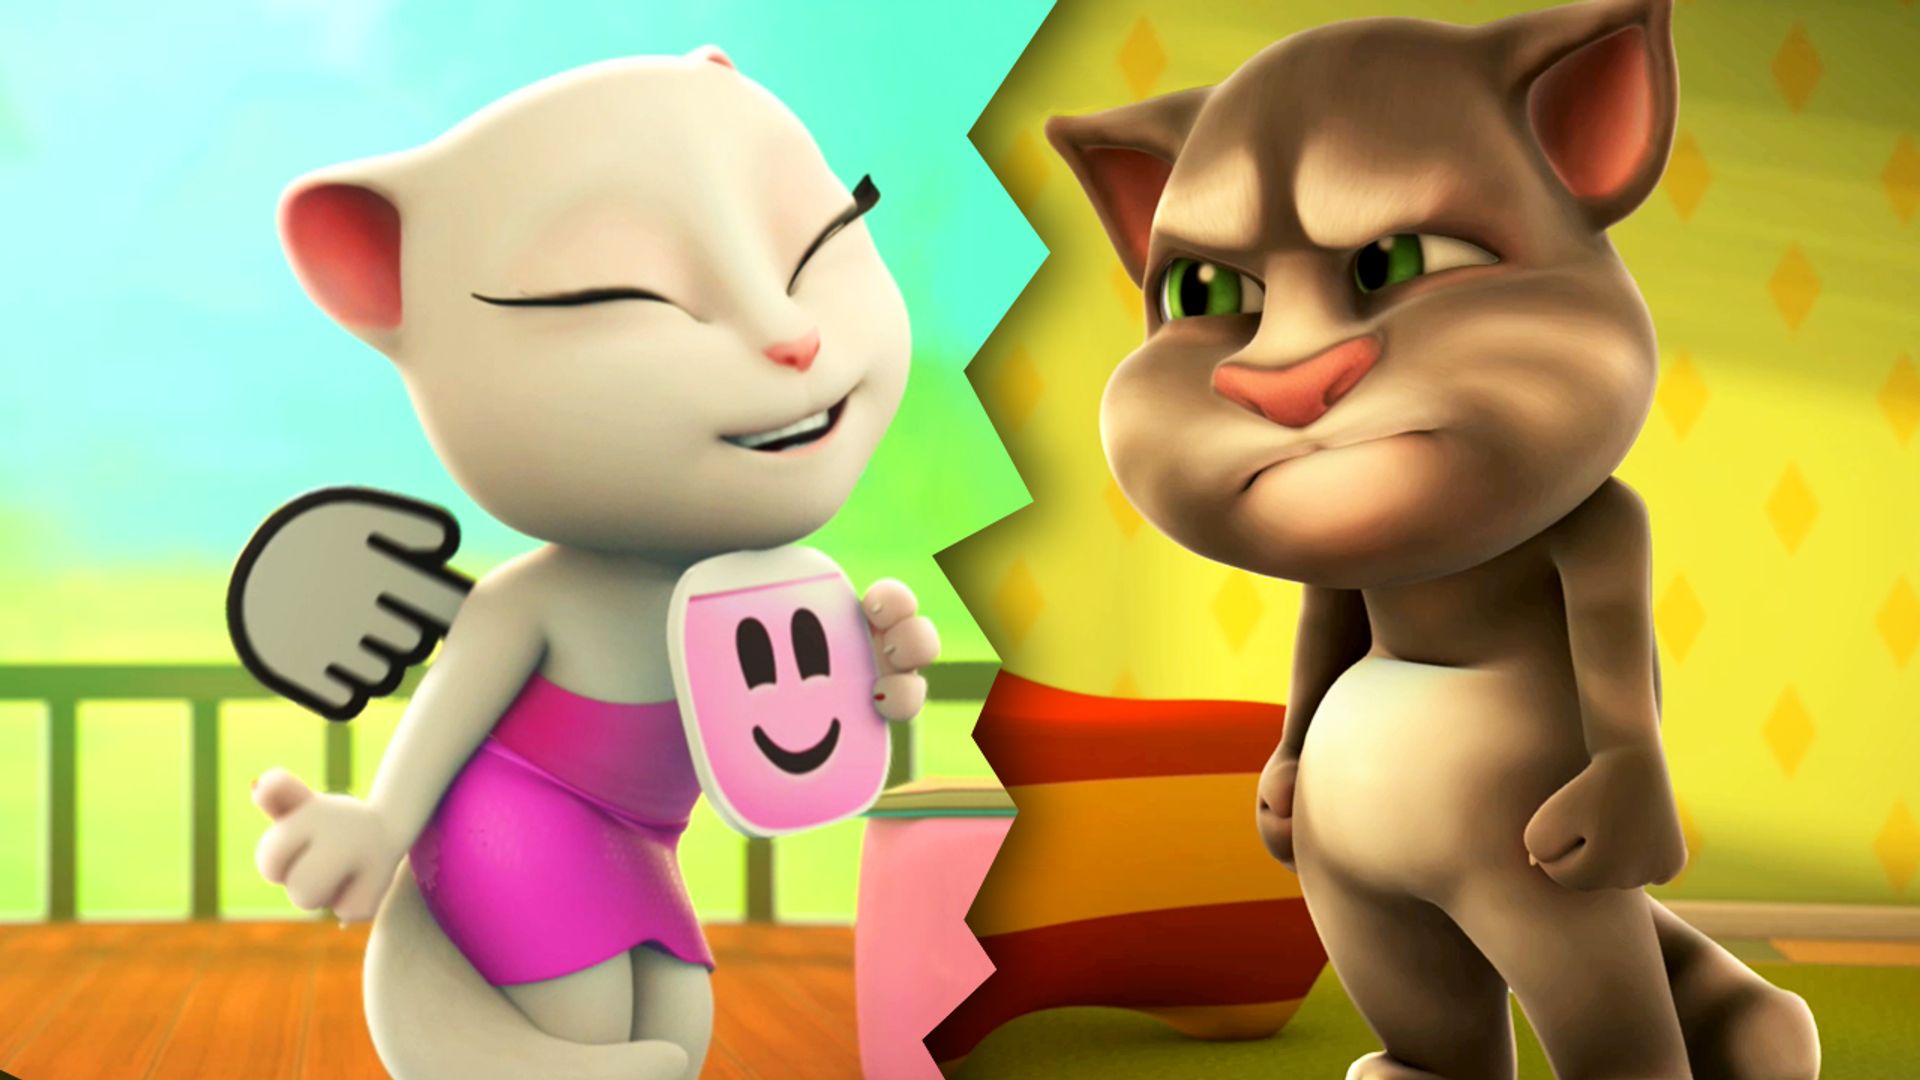 Watch Talking Tom and Friends (Portuguese) on